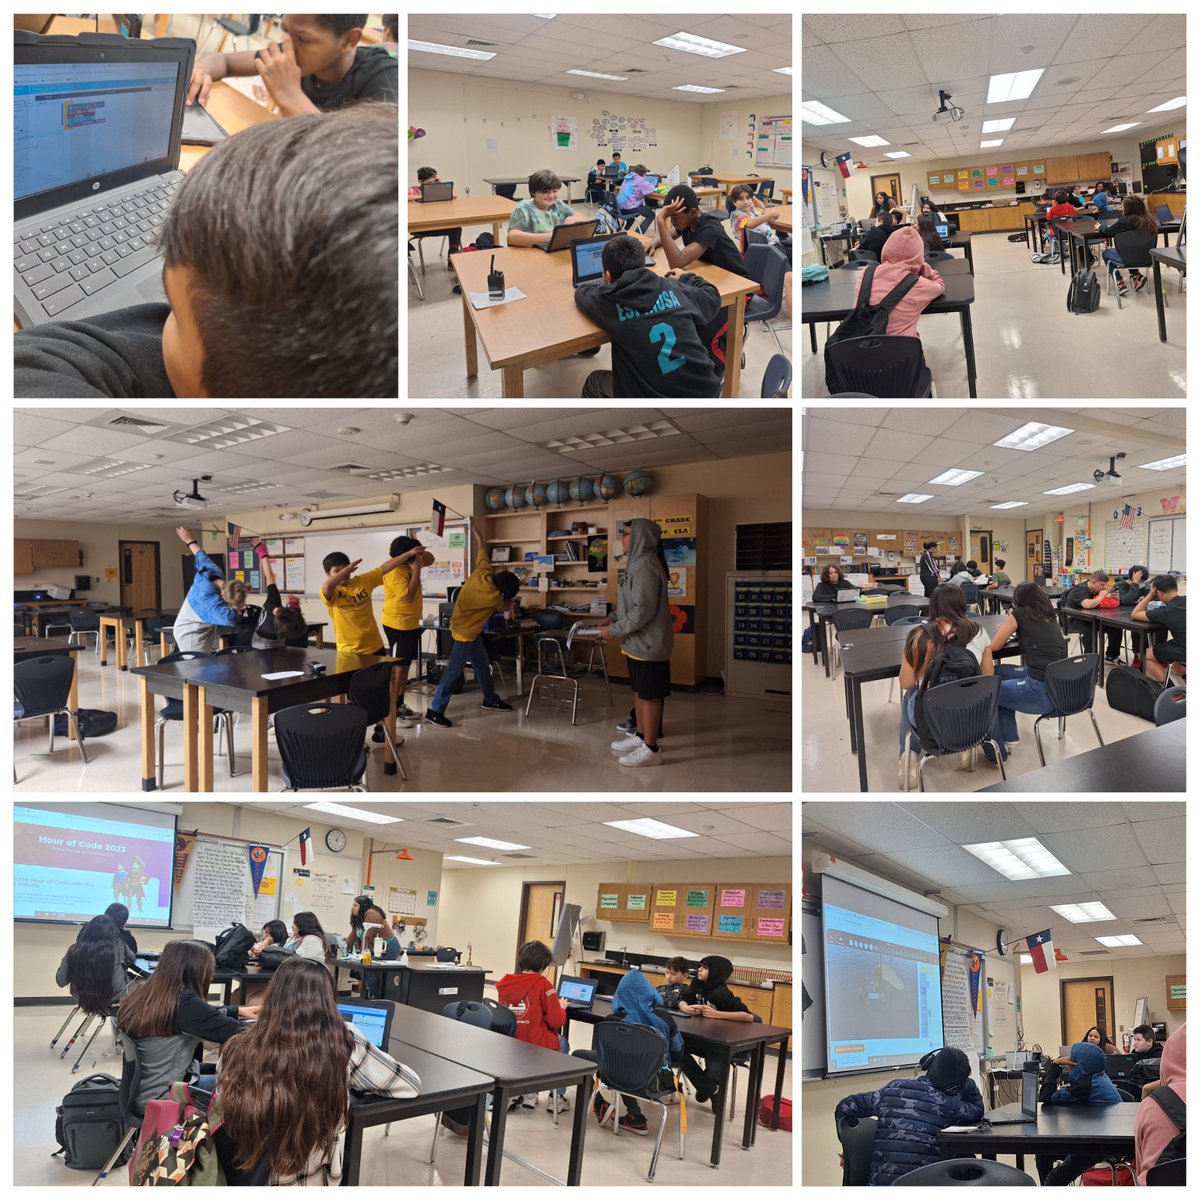 ACE Club LT celebrating Computer Science Education Week @NISDLearningTre @NISDJones @NISDJonesSTEM @hourofcode @TexasCSO @scpetty Some kids danced their moves, some created songs, others coded in group. They loved the idea of kids all around the world coding together @LazoNISD